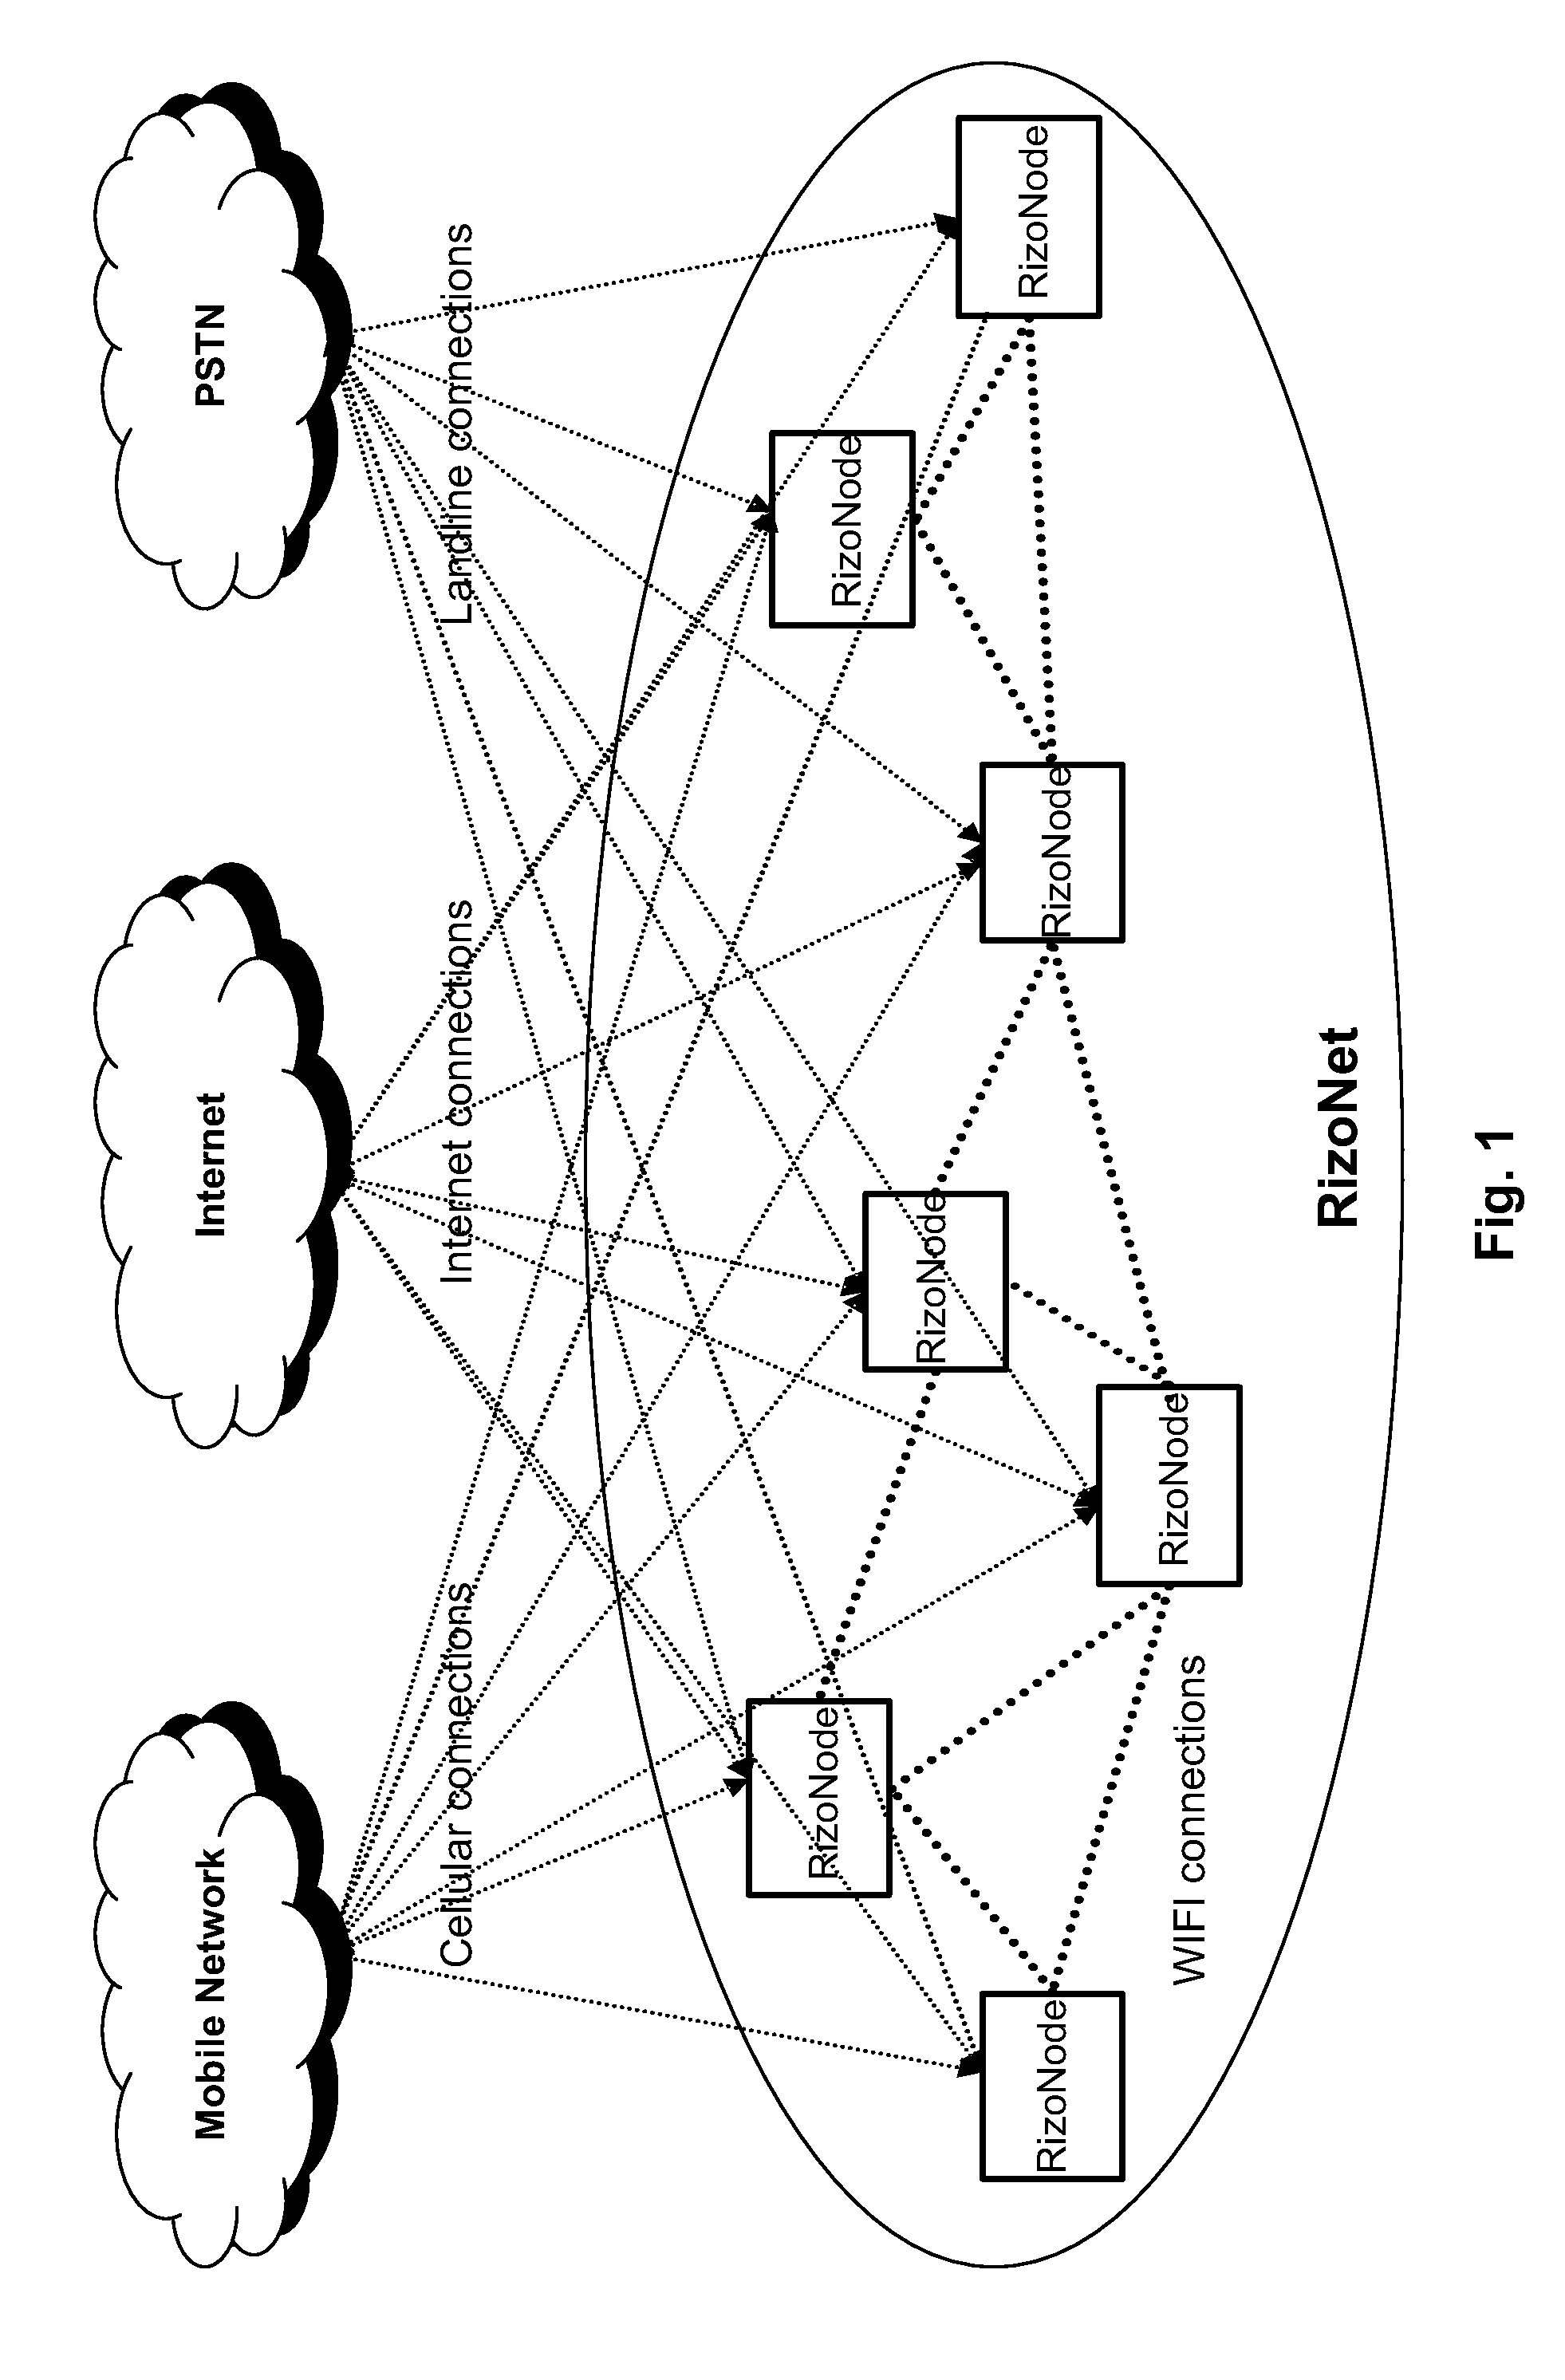 Apparatuses for Hybrid Wired and Wireless Universal Access Networks